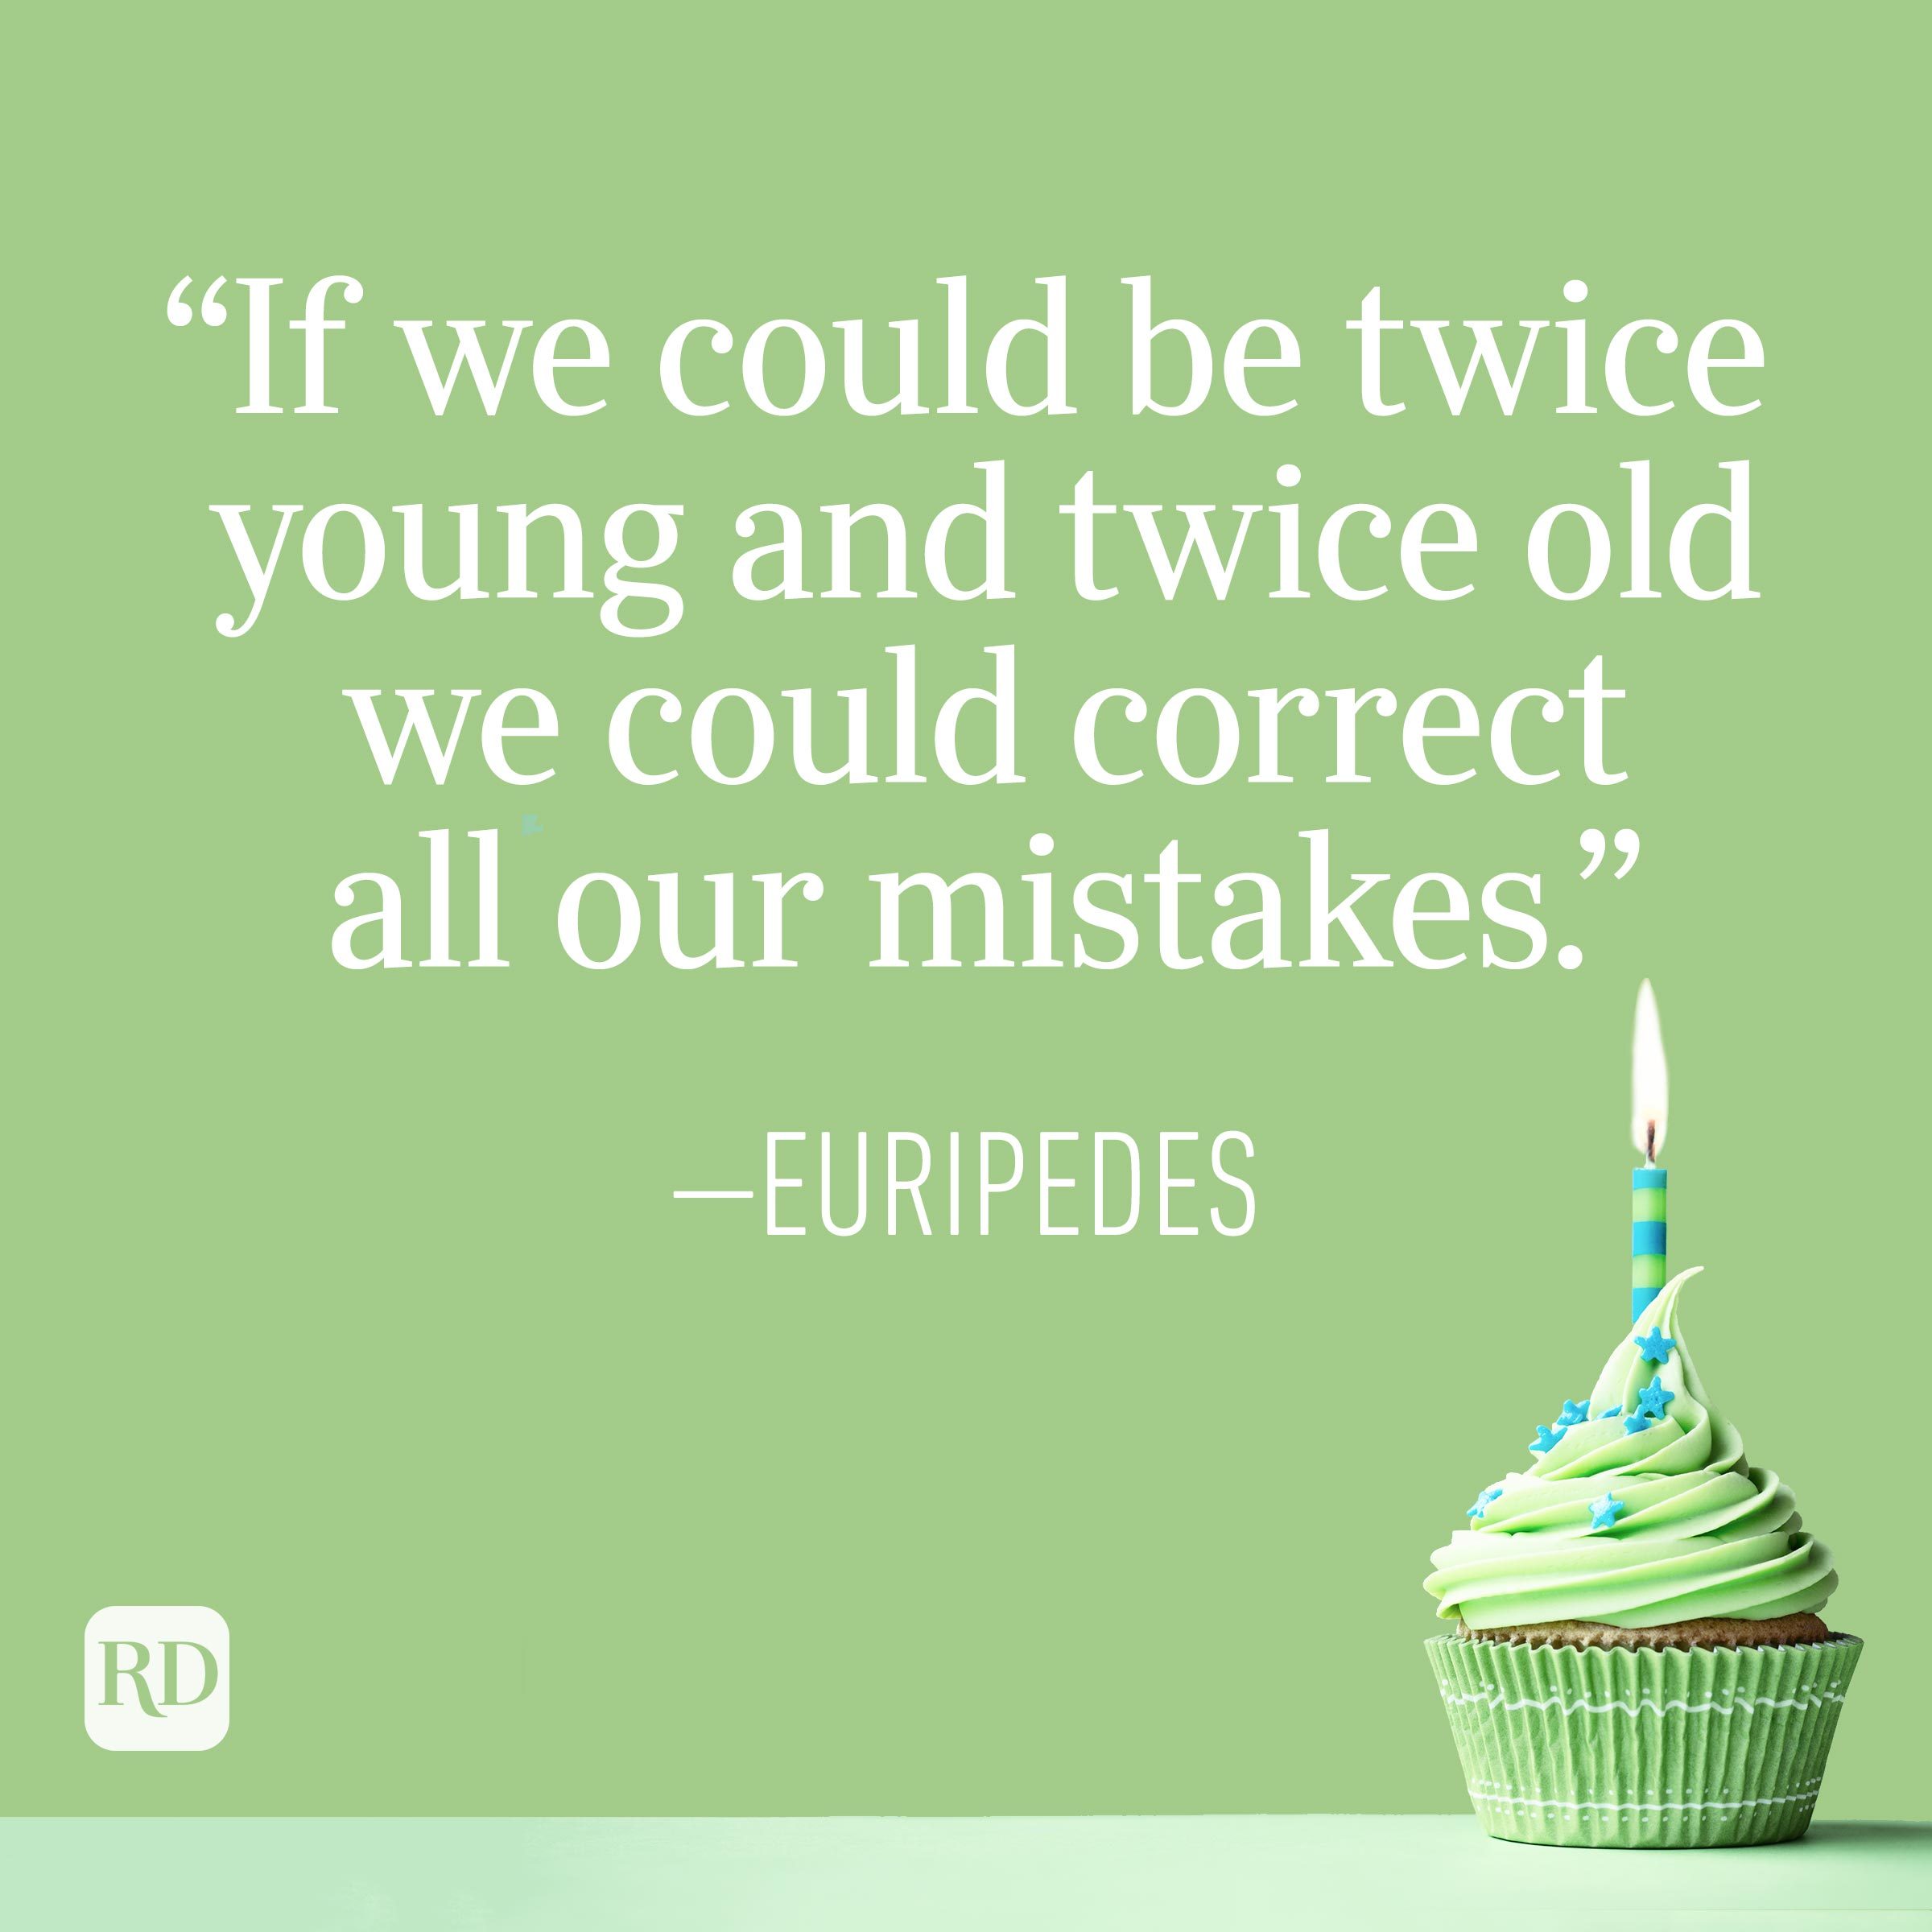 "If we could be twice young and twice old we could correct all our mistakes." —Euripedes